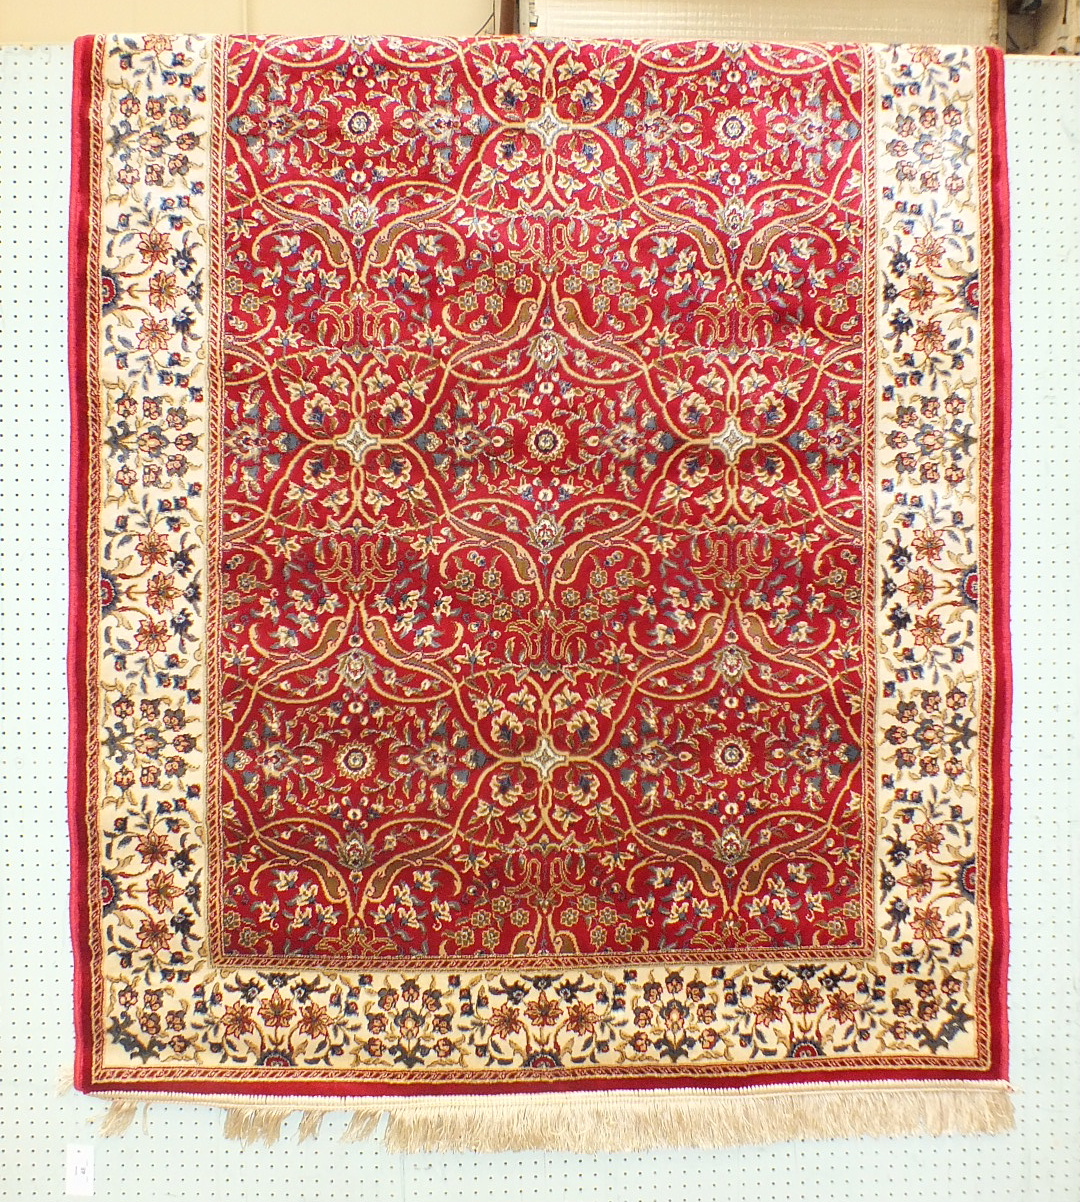 A similar rug with all-over foliate design, on red ground with ivory border.